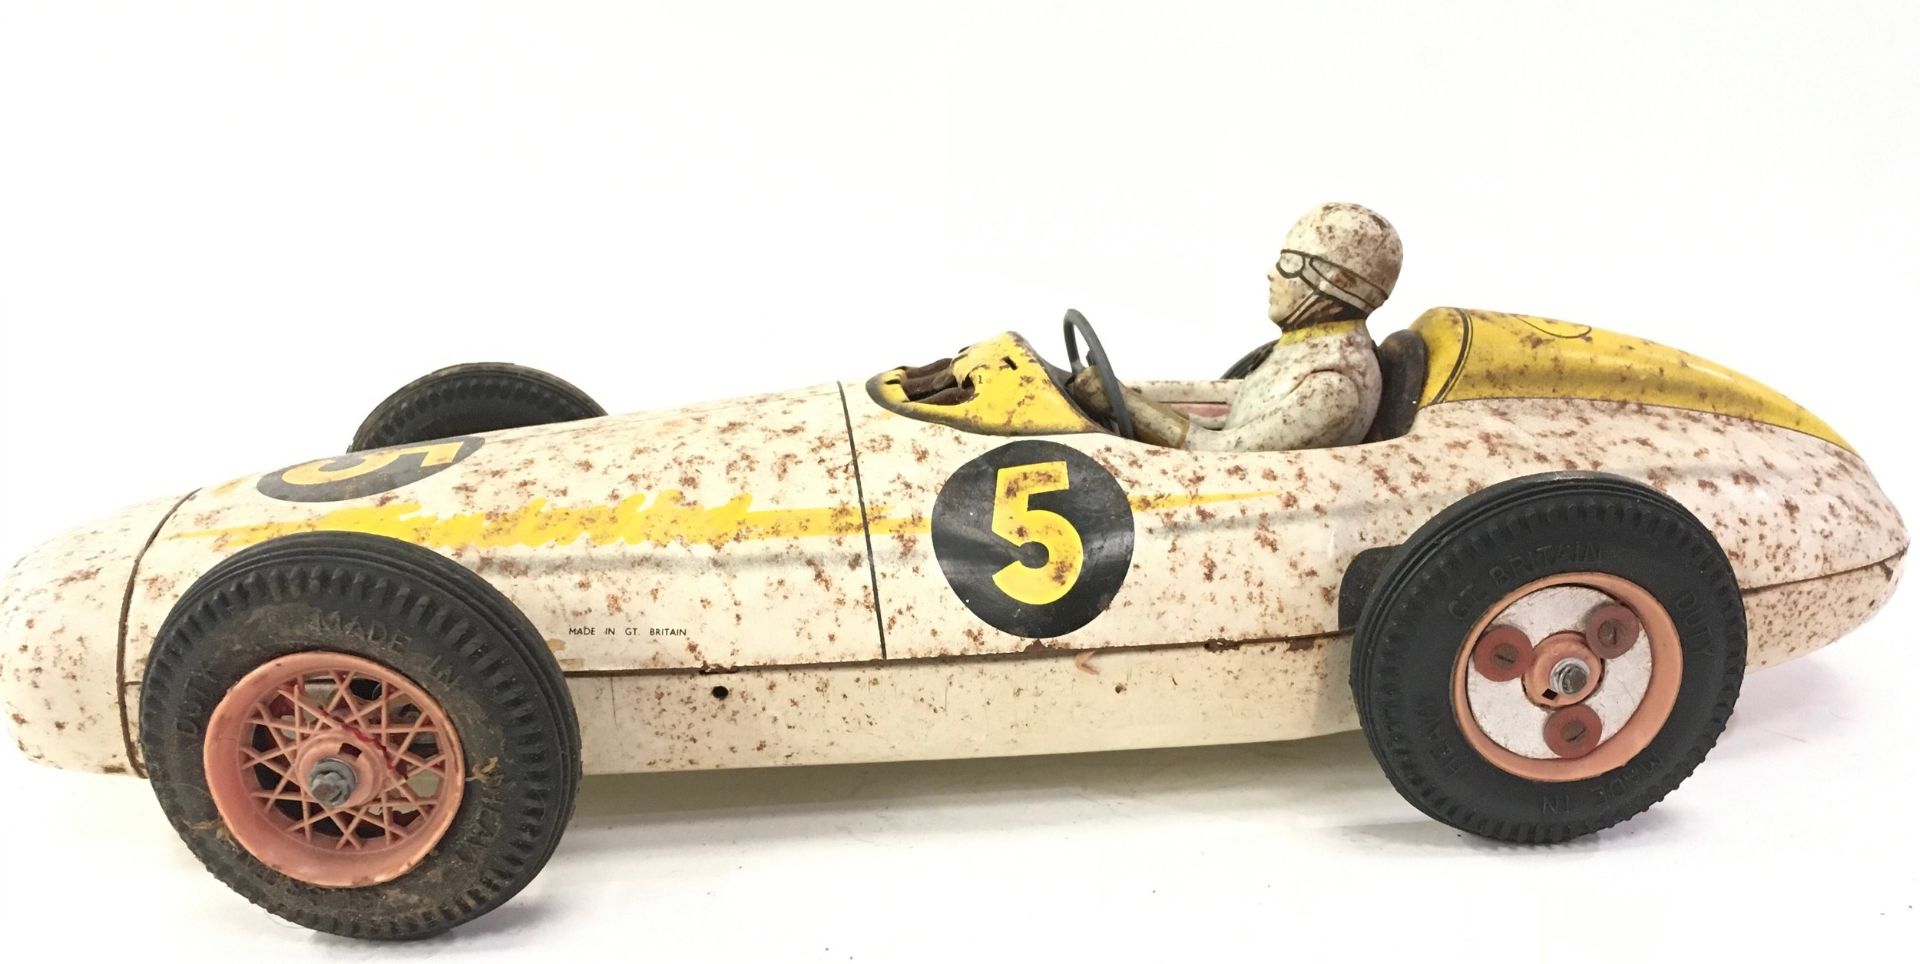 Mettoy (UK) large tinplate "Thunderbird" Mercedes Racing Car - friction drive model with driver - Image 3 of 5